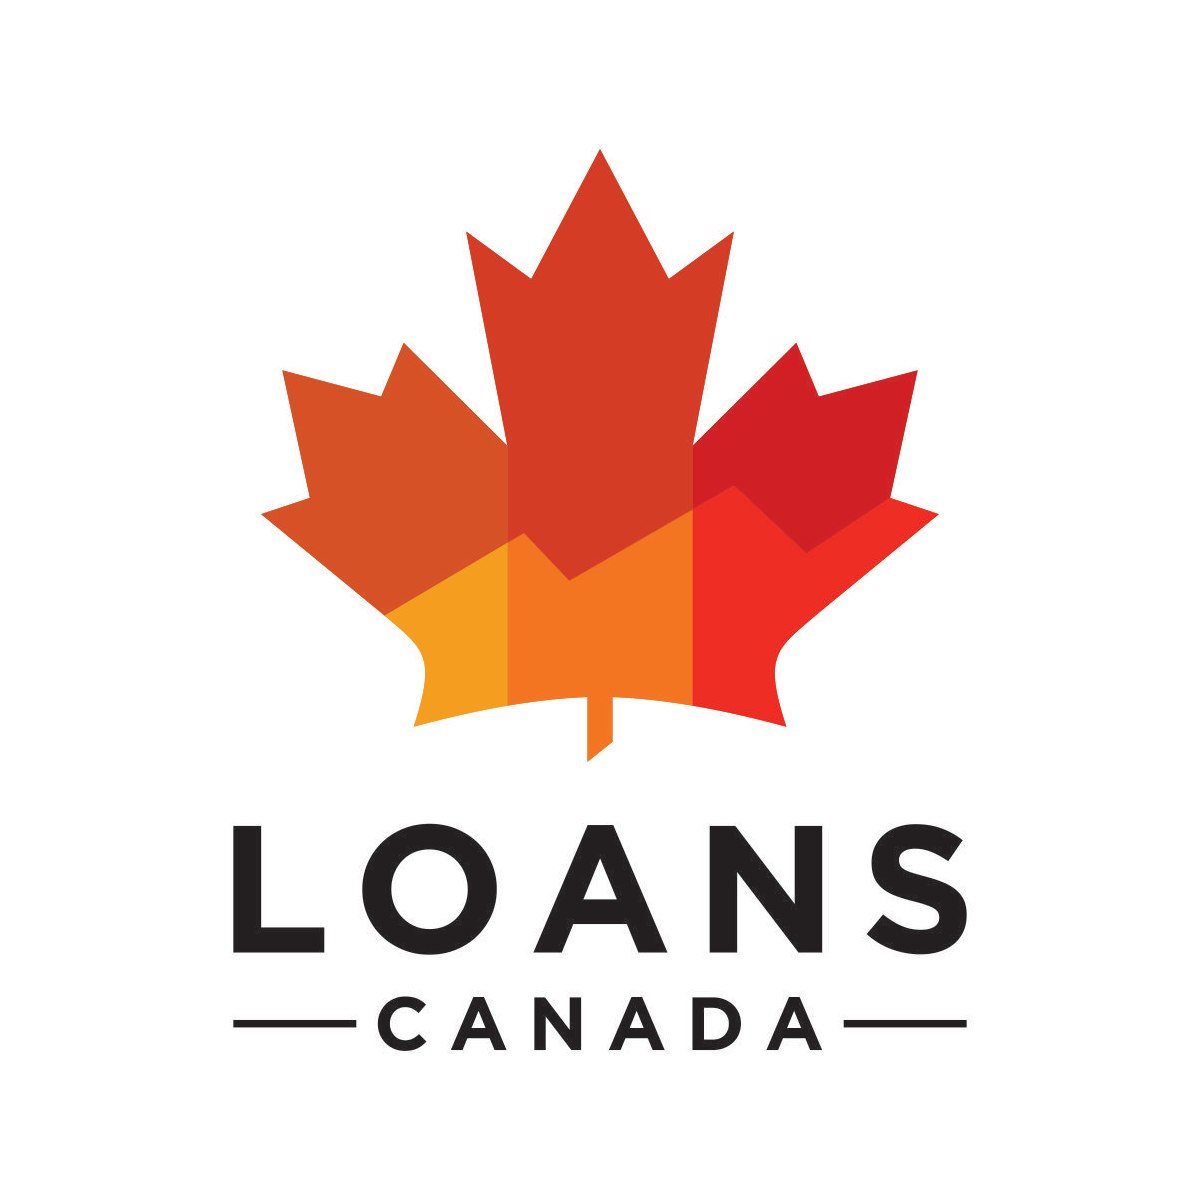 Loans Canada Expands Its Partnership Programs With New Affiliate Program  Features and Loan Search Widget | Newswire